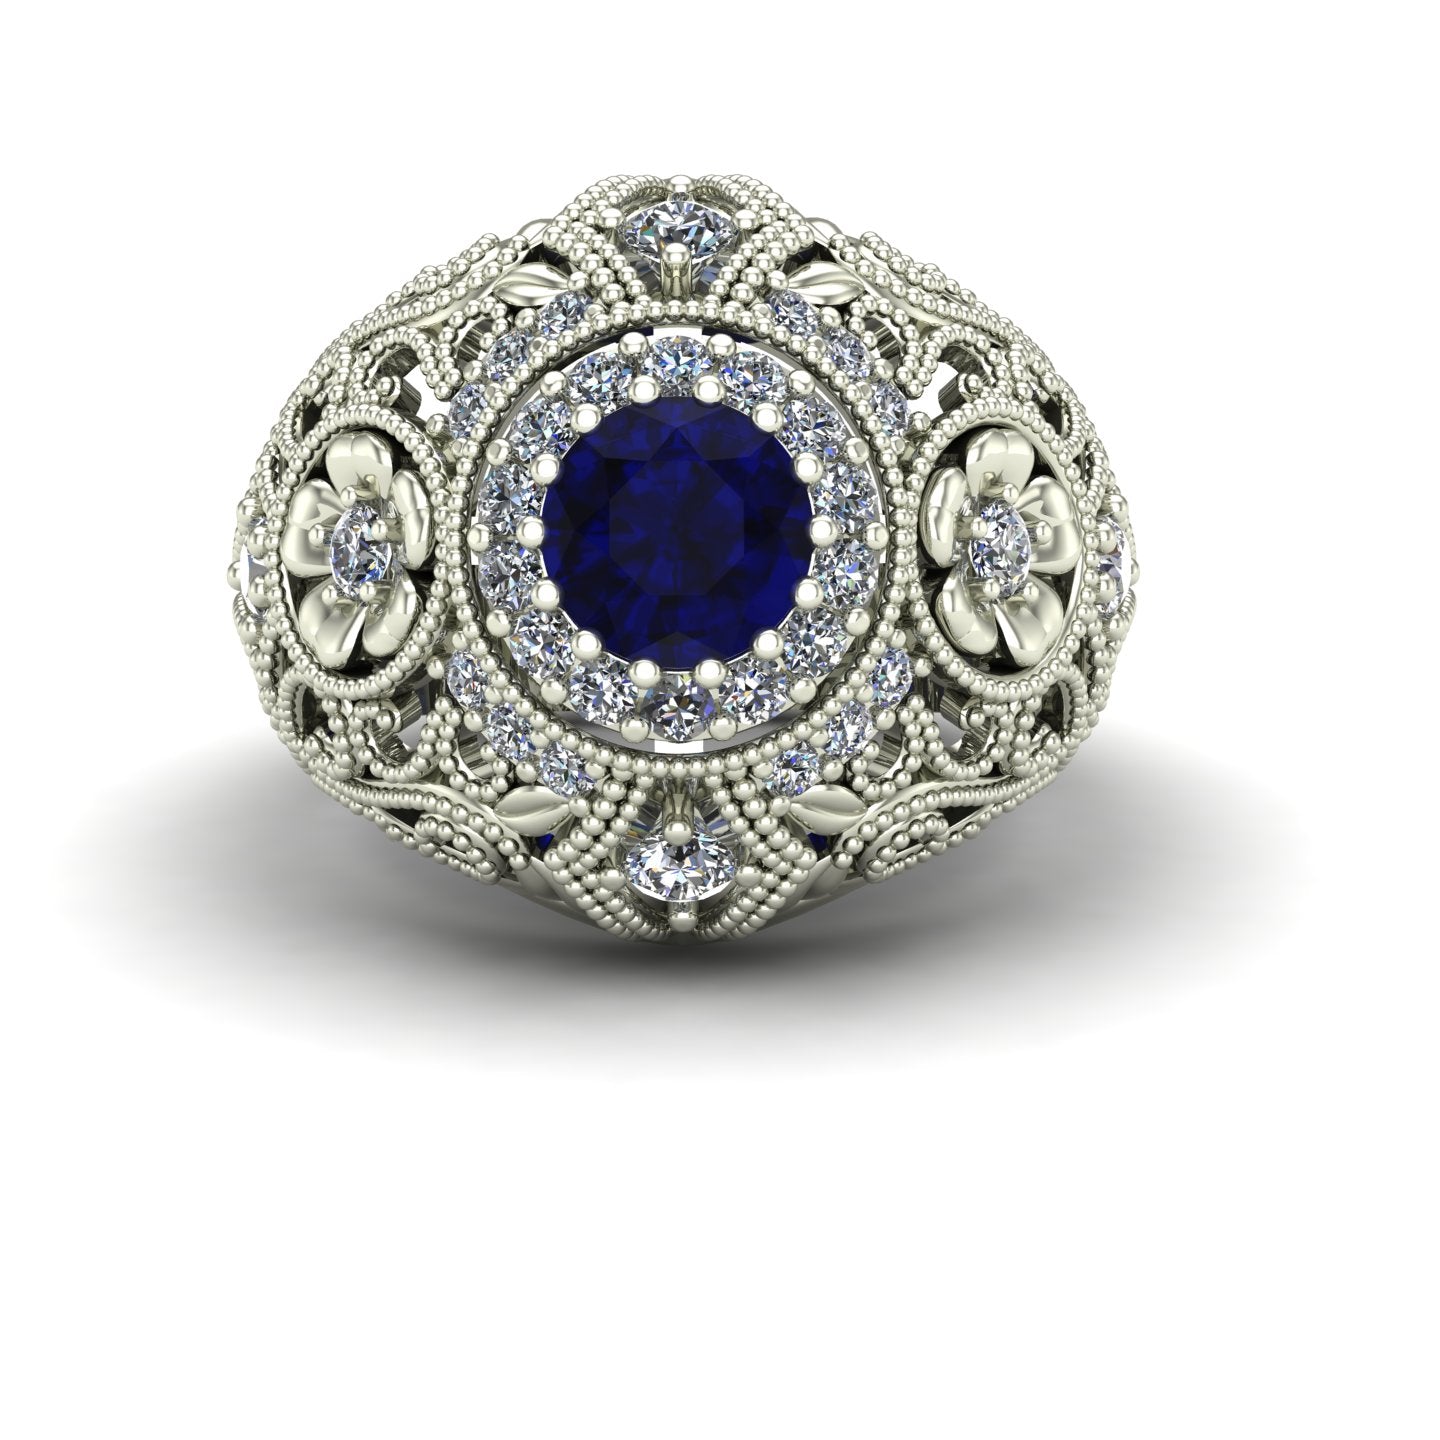 Color Change Sapphire Ring - Cushion 4.85 ctw Ceylon Sapphire and Diamond  Ring in 14k white gold (SSR-5880)